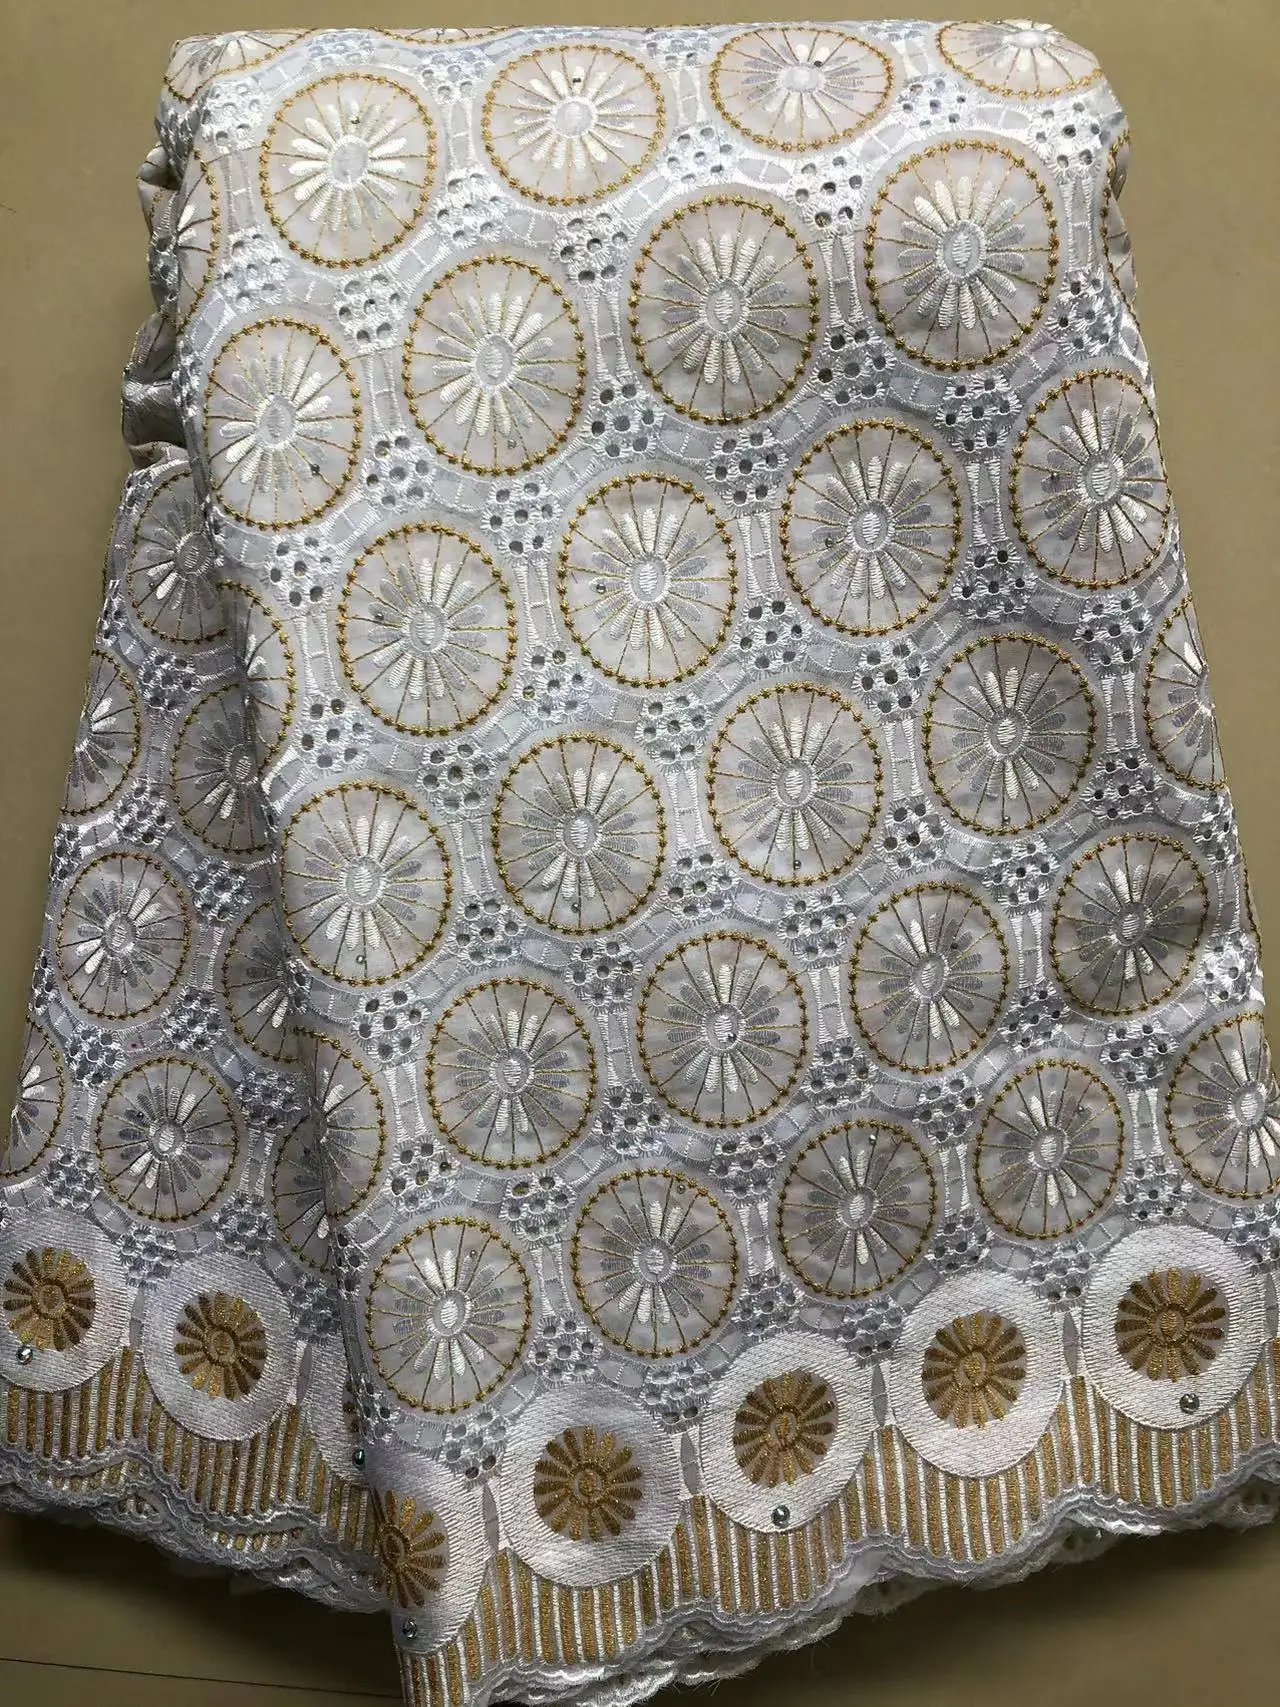 African Cotton Lace Fabric 2023 High Quality Swiss Voile Lace In Switzerland With Stones Nigerian Lace Fabrics For Wedding Dress swiss voile lace in switzerland embroidery white african lace fabric pure cotton lace for wedding party dress ty010